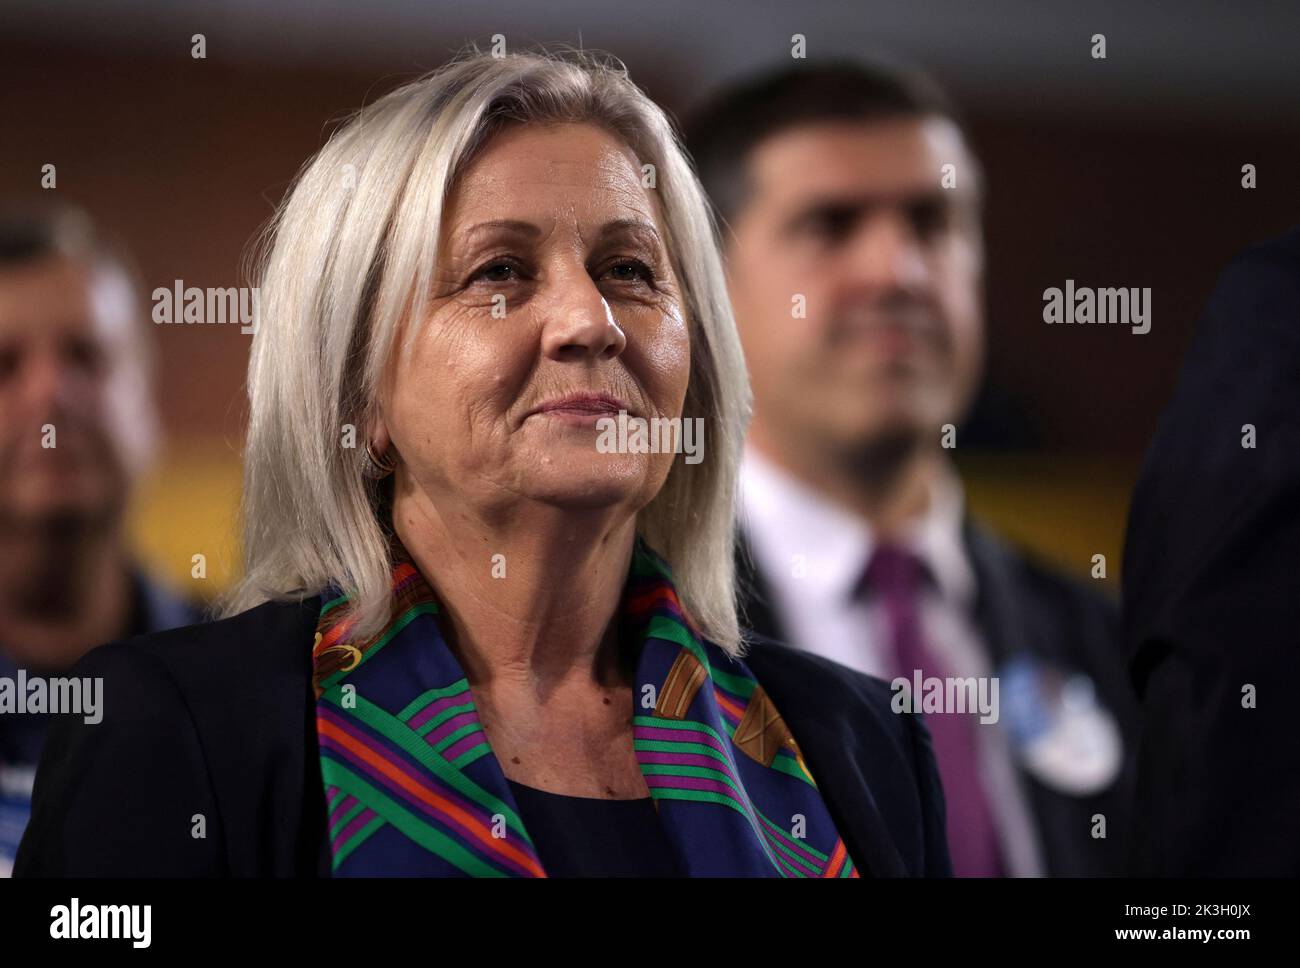 Borjana Kristo of the Croatian Demotracit Union and Croat candidate of the Tri-partite Bosnian Presidency attends a pre-election rally in Zepce, Bosnia and Herzegovina, September 26, 2022. REUTERS/Dado Ruvic Stock Photo